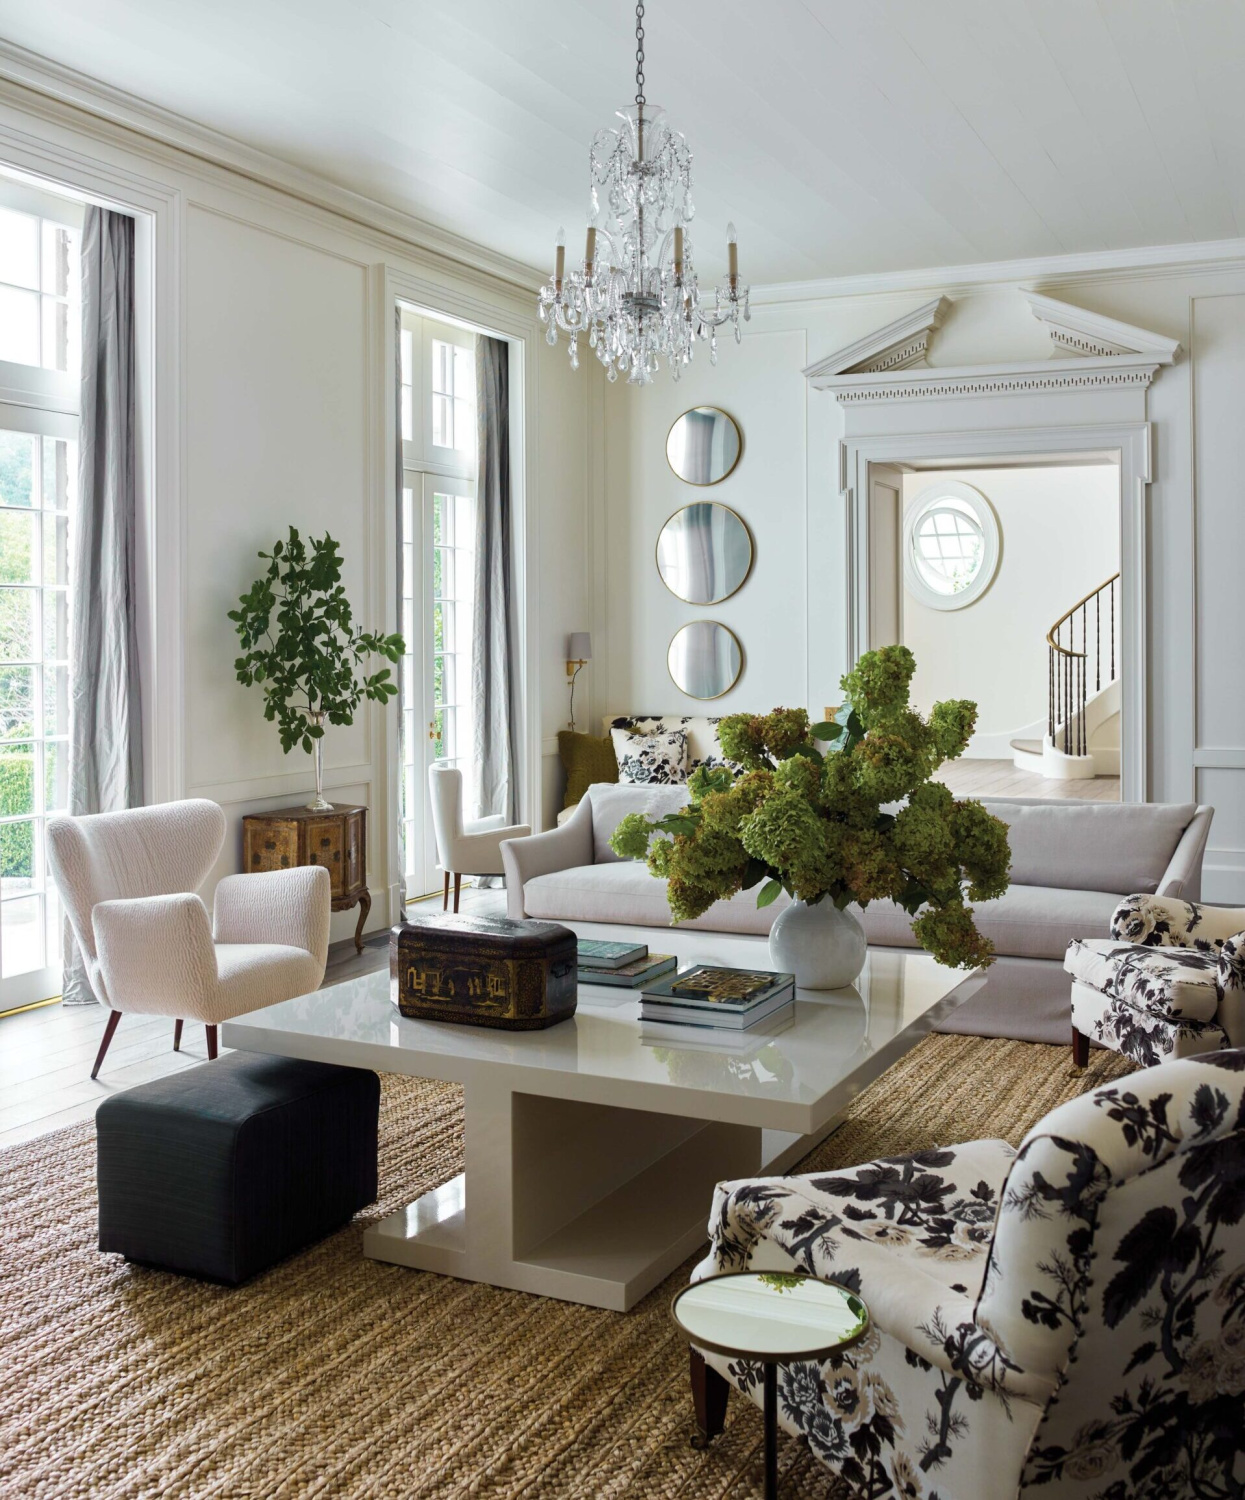 Modern traditional living room in an Atlanta home by D. Stanley Dixon with interiors by Carolyn Malone. Ivory club chairs by Coup d’État and a custom coffee table hit a more contemporary note. #moderntraditional #carolynmalone #stanleydixon